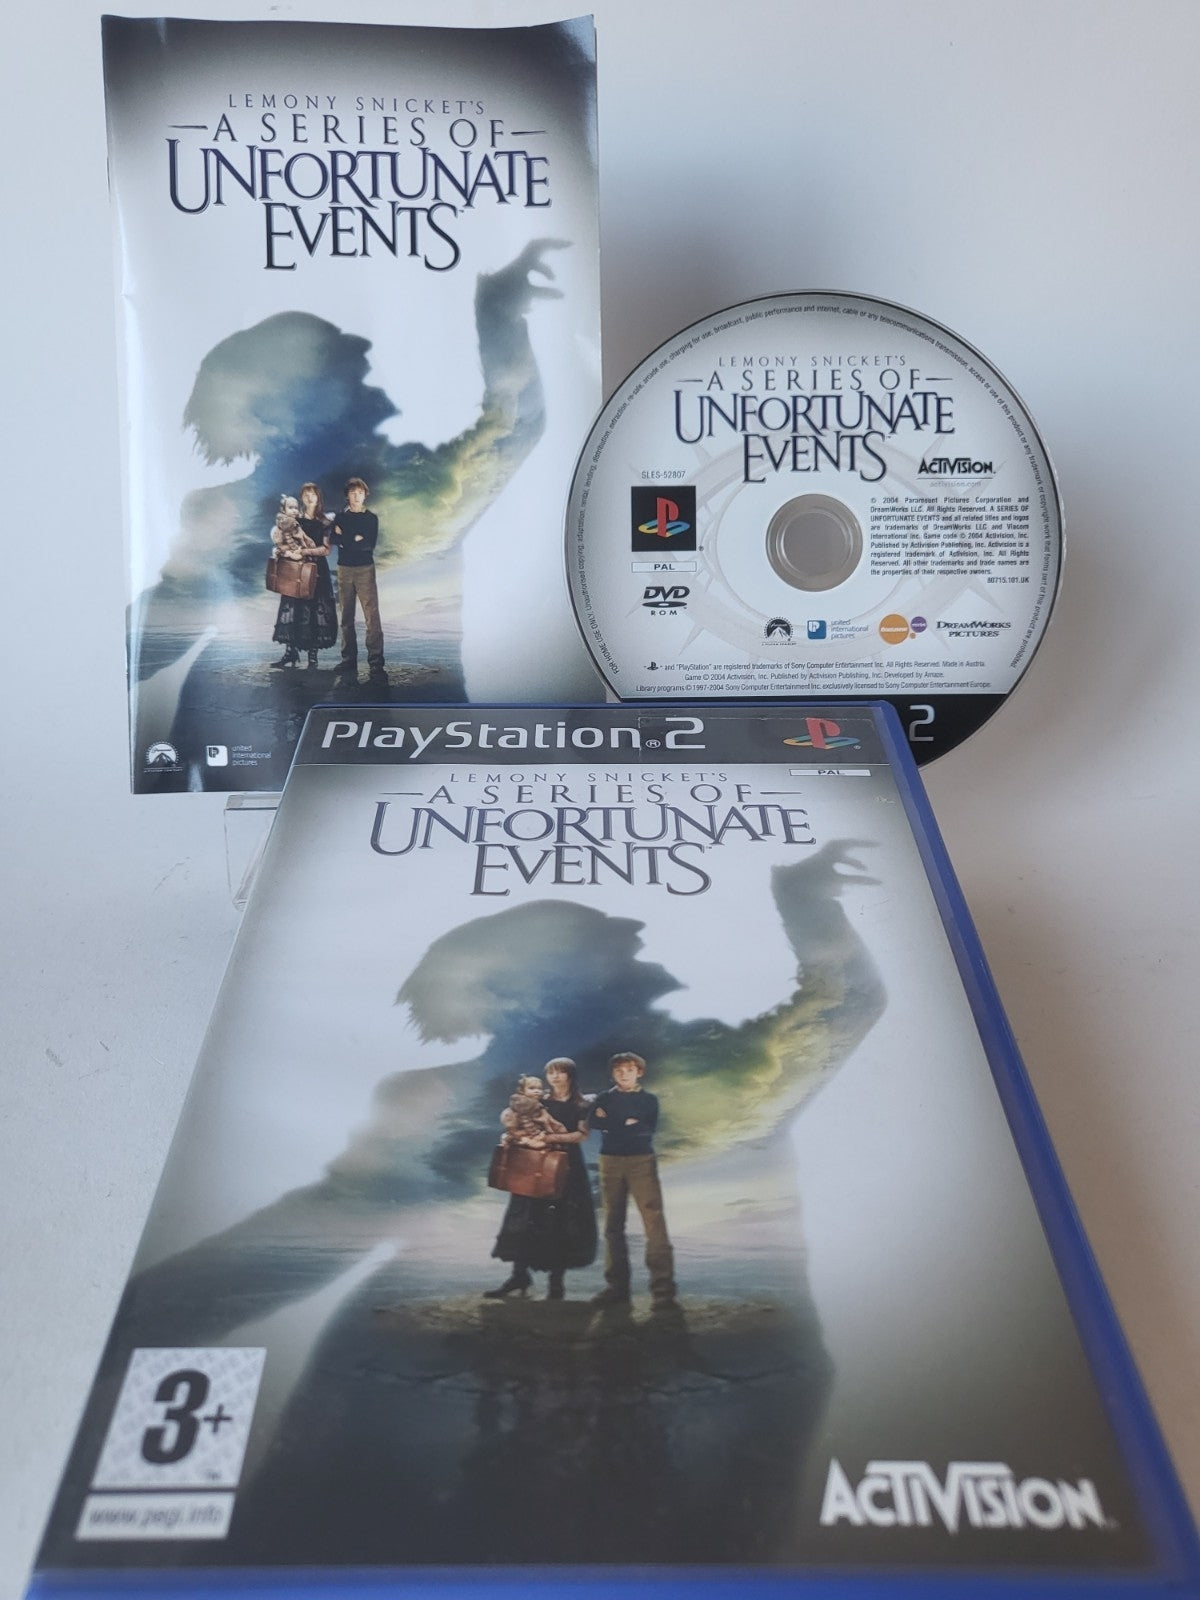 Lemony Snicket's A Series of Unfortunate Events Playstation 2